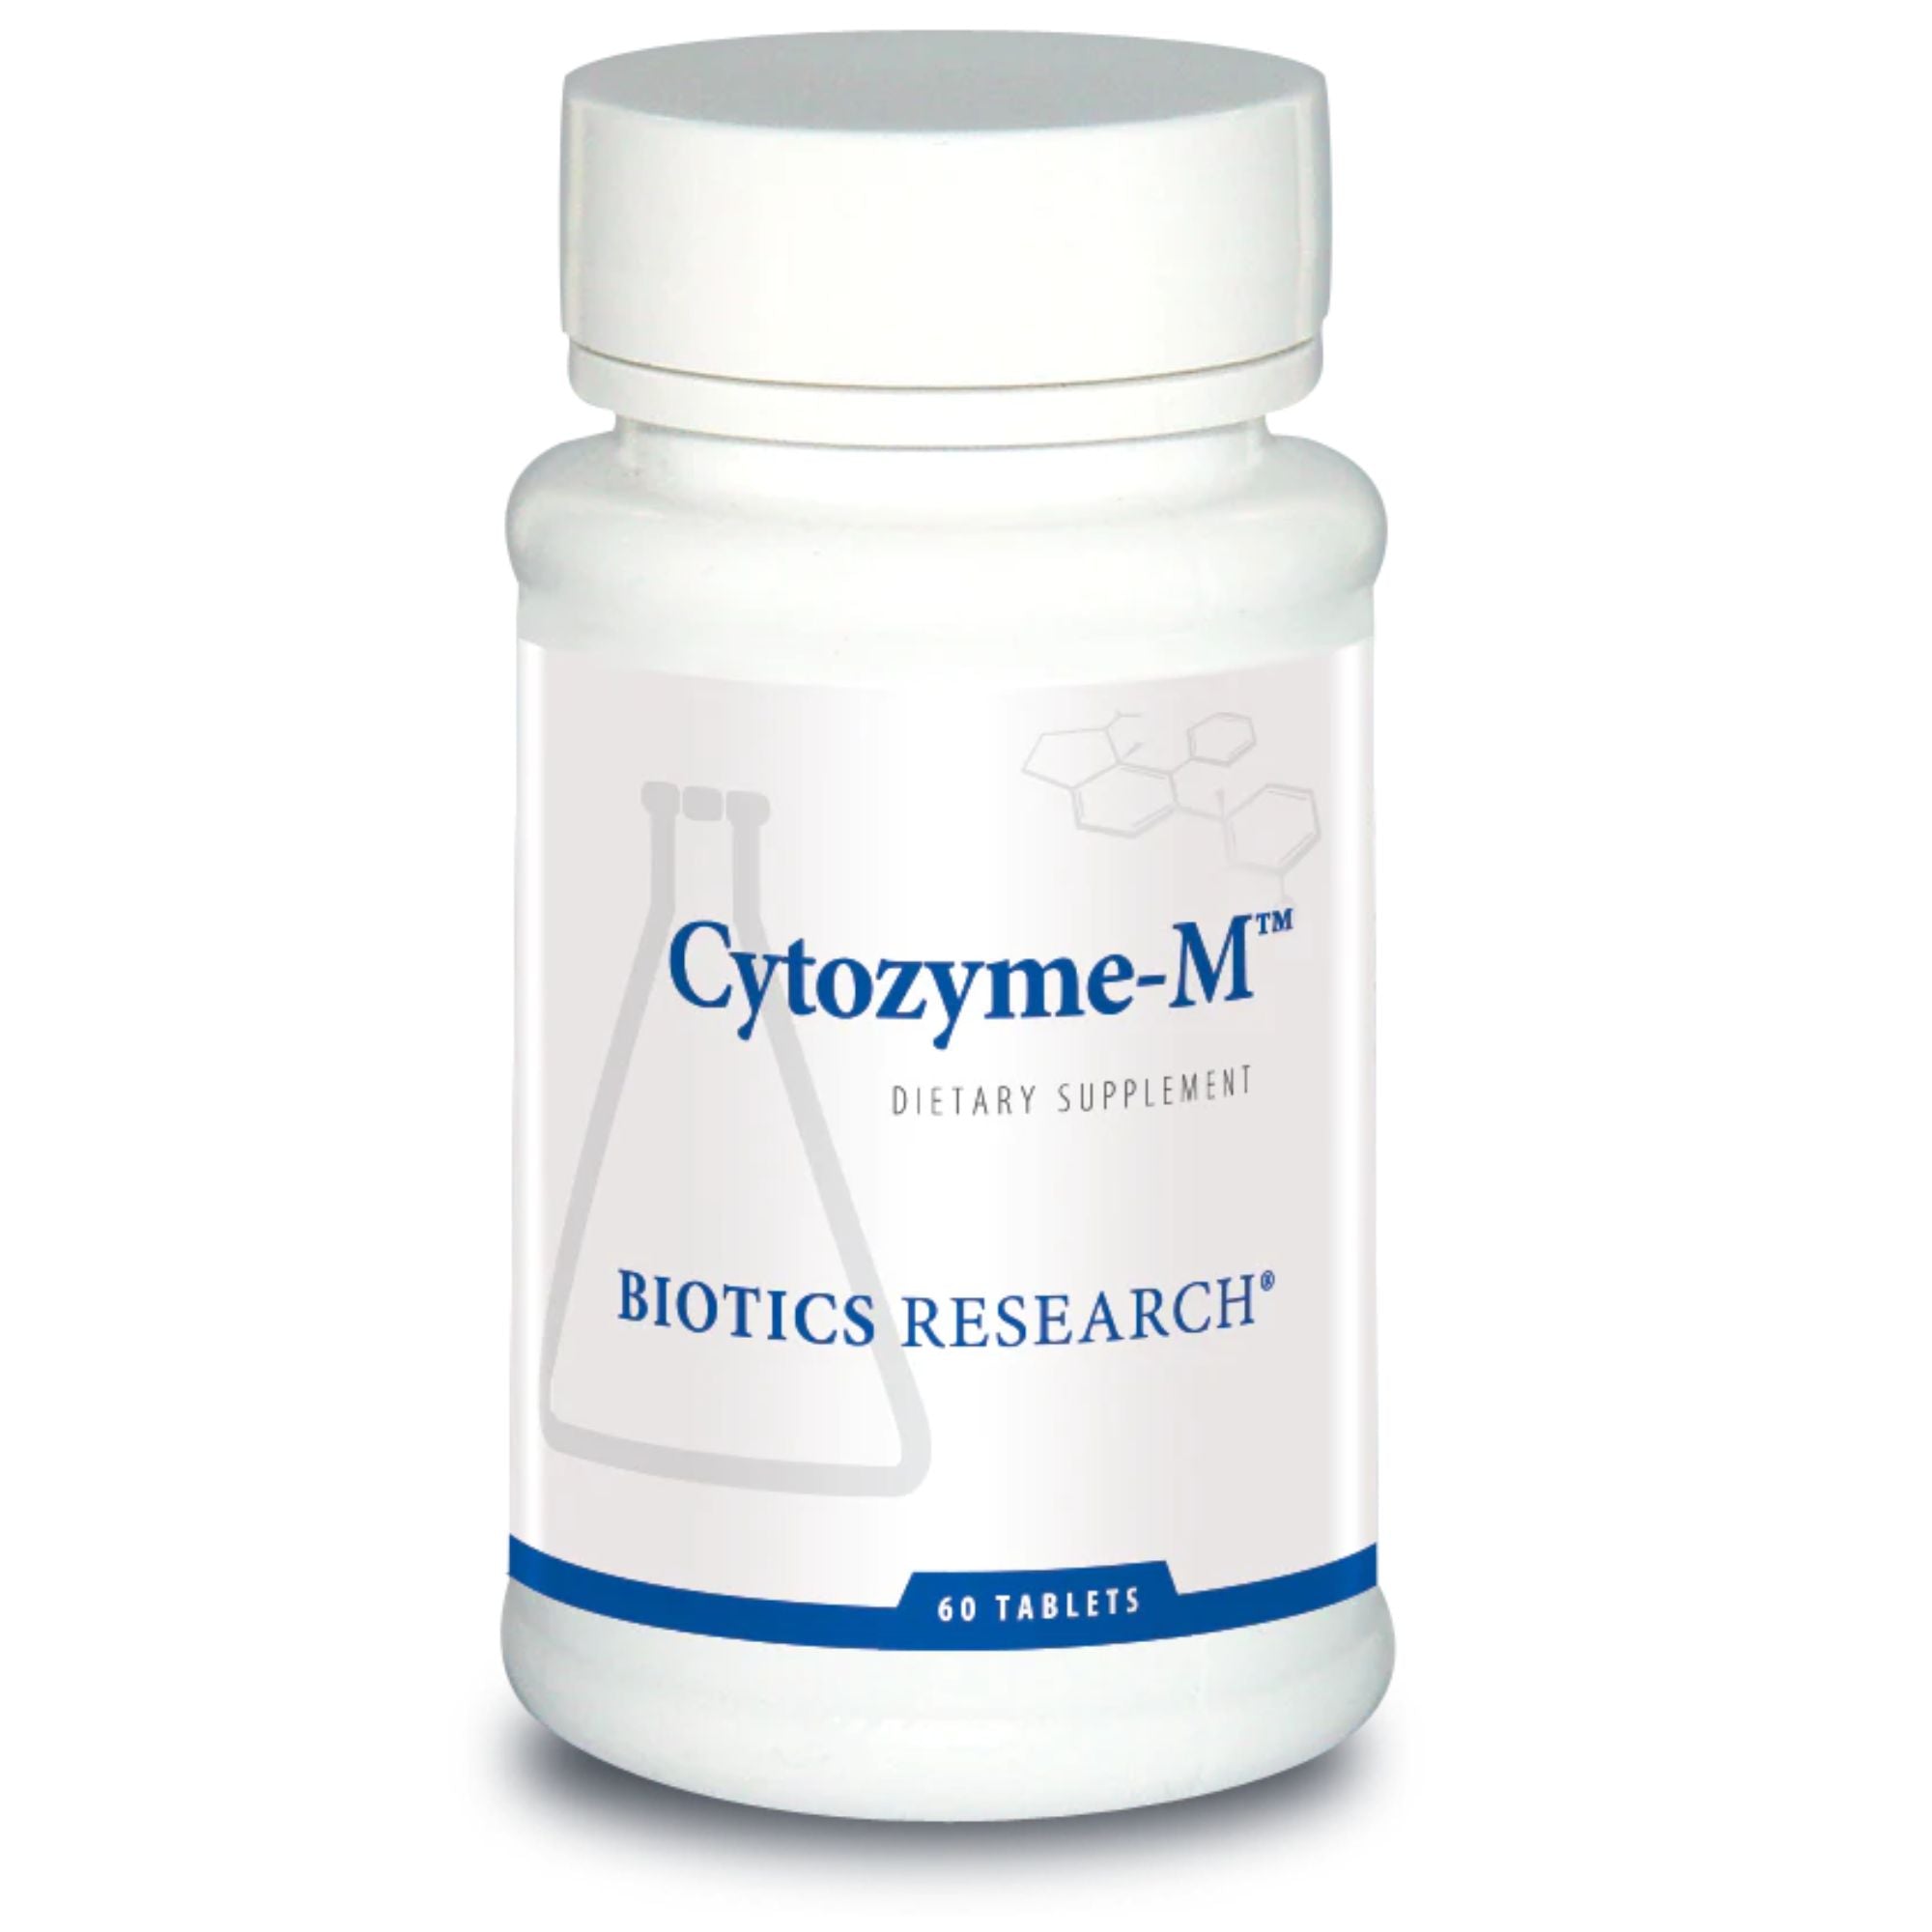 CYTOZYME-M Male hormonal support